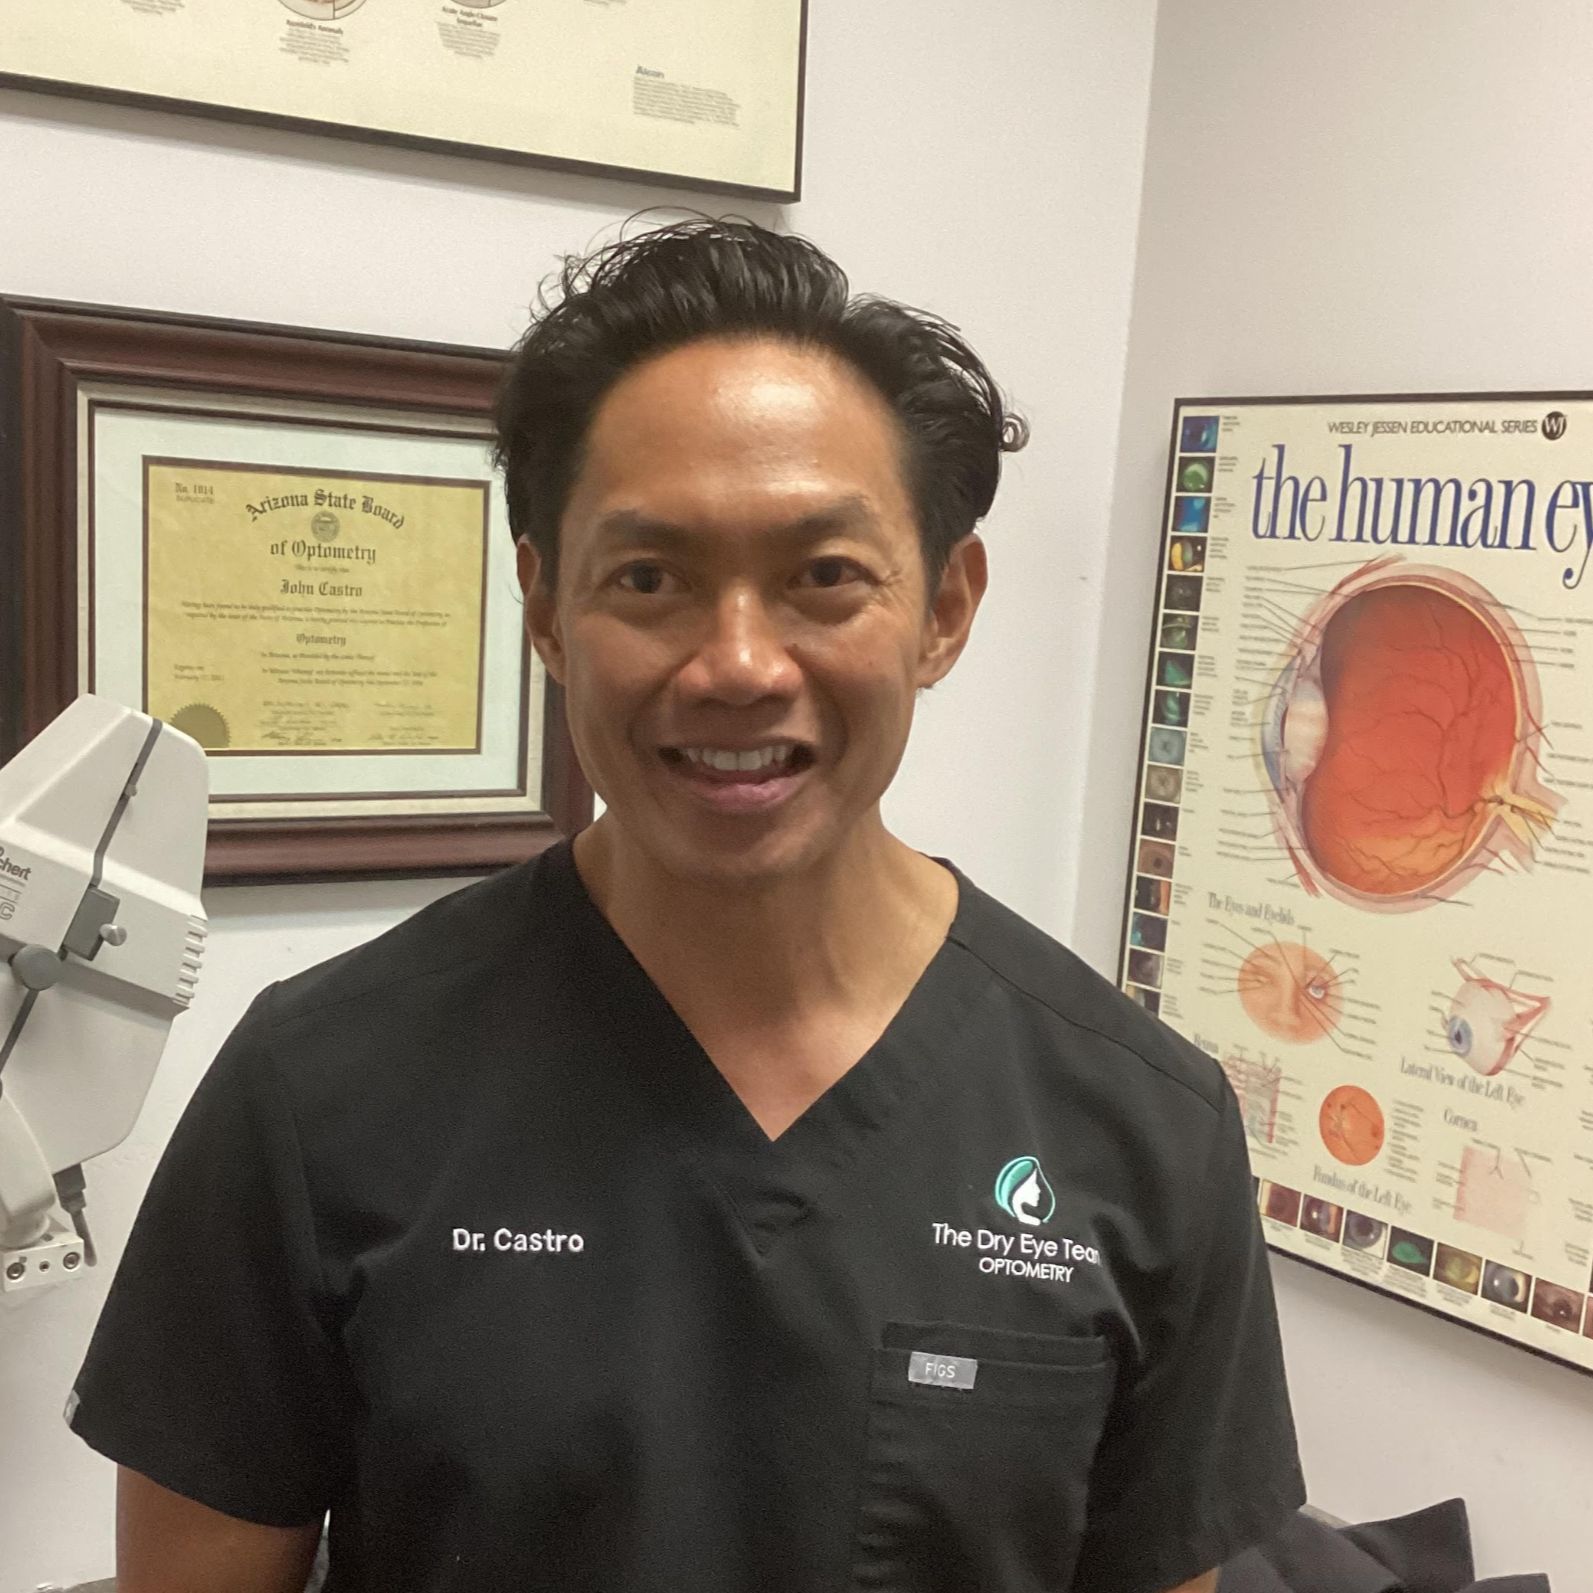 Dr. John Castro - Optometrist - PerSpectacles Hearing & Eye Solutions